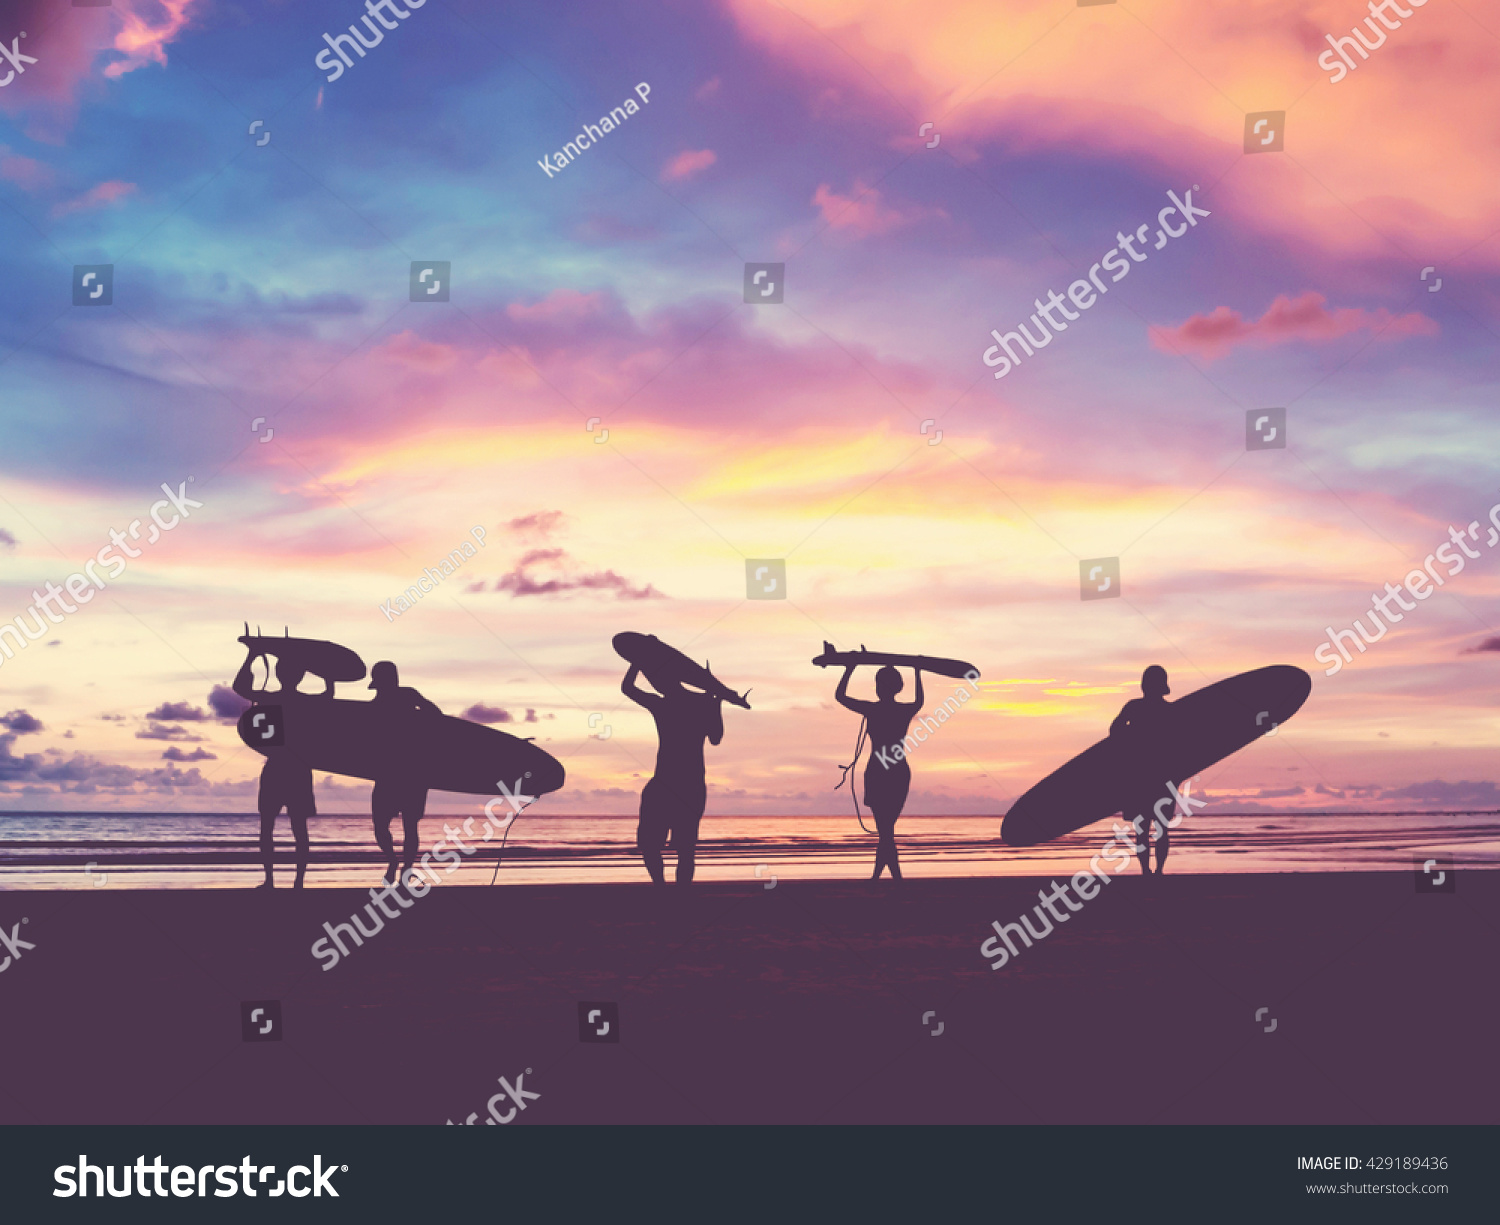 Silhouette Of surfer people carrying their surfboard on sunset beach, vintage filter effect with soft style #429189436